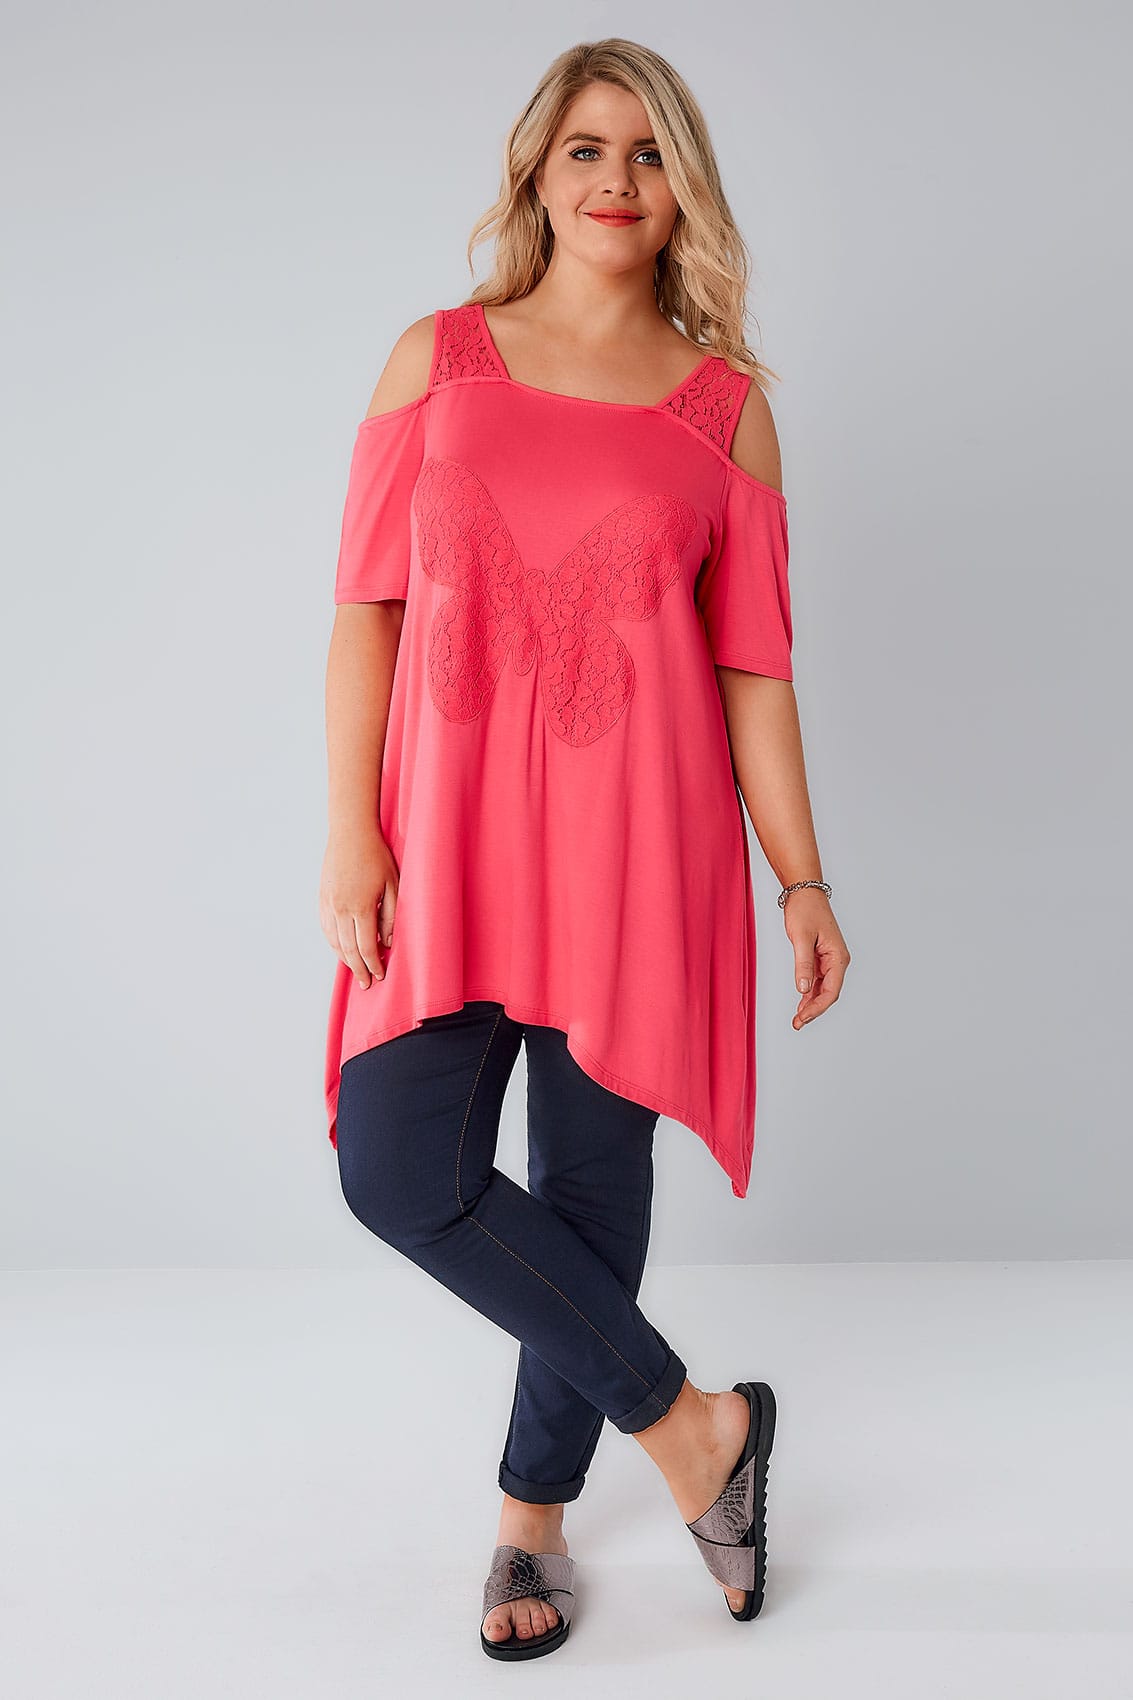 Hot Pink Bardot Jersey Top With Lace Butterfly Panel & Lace Straps plus ...